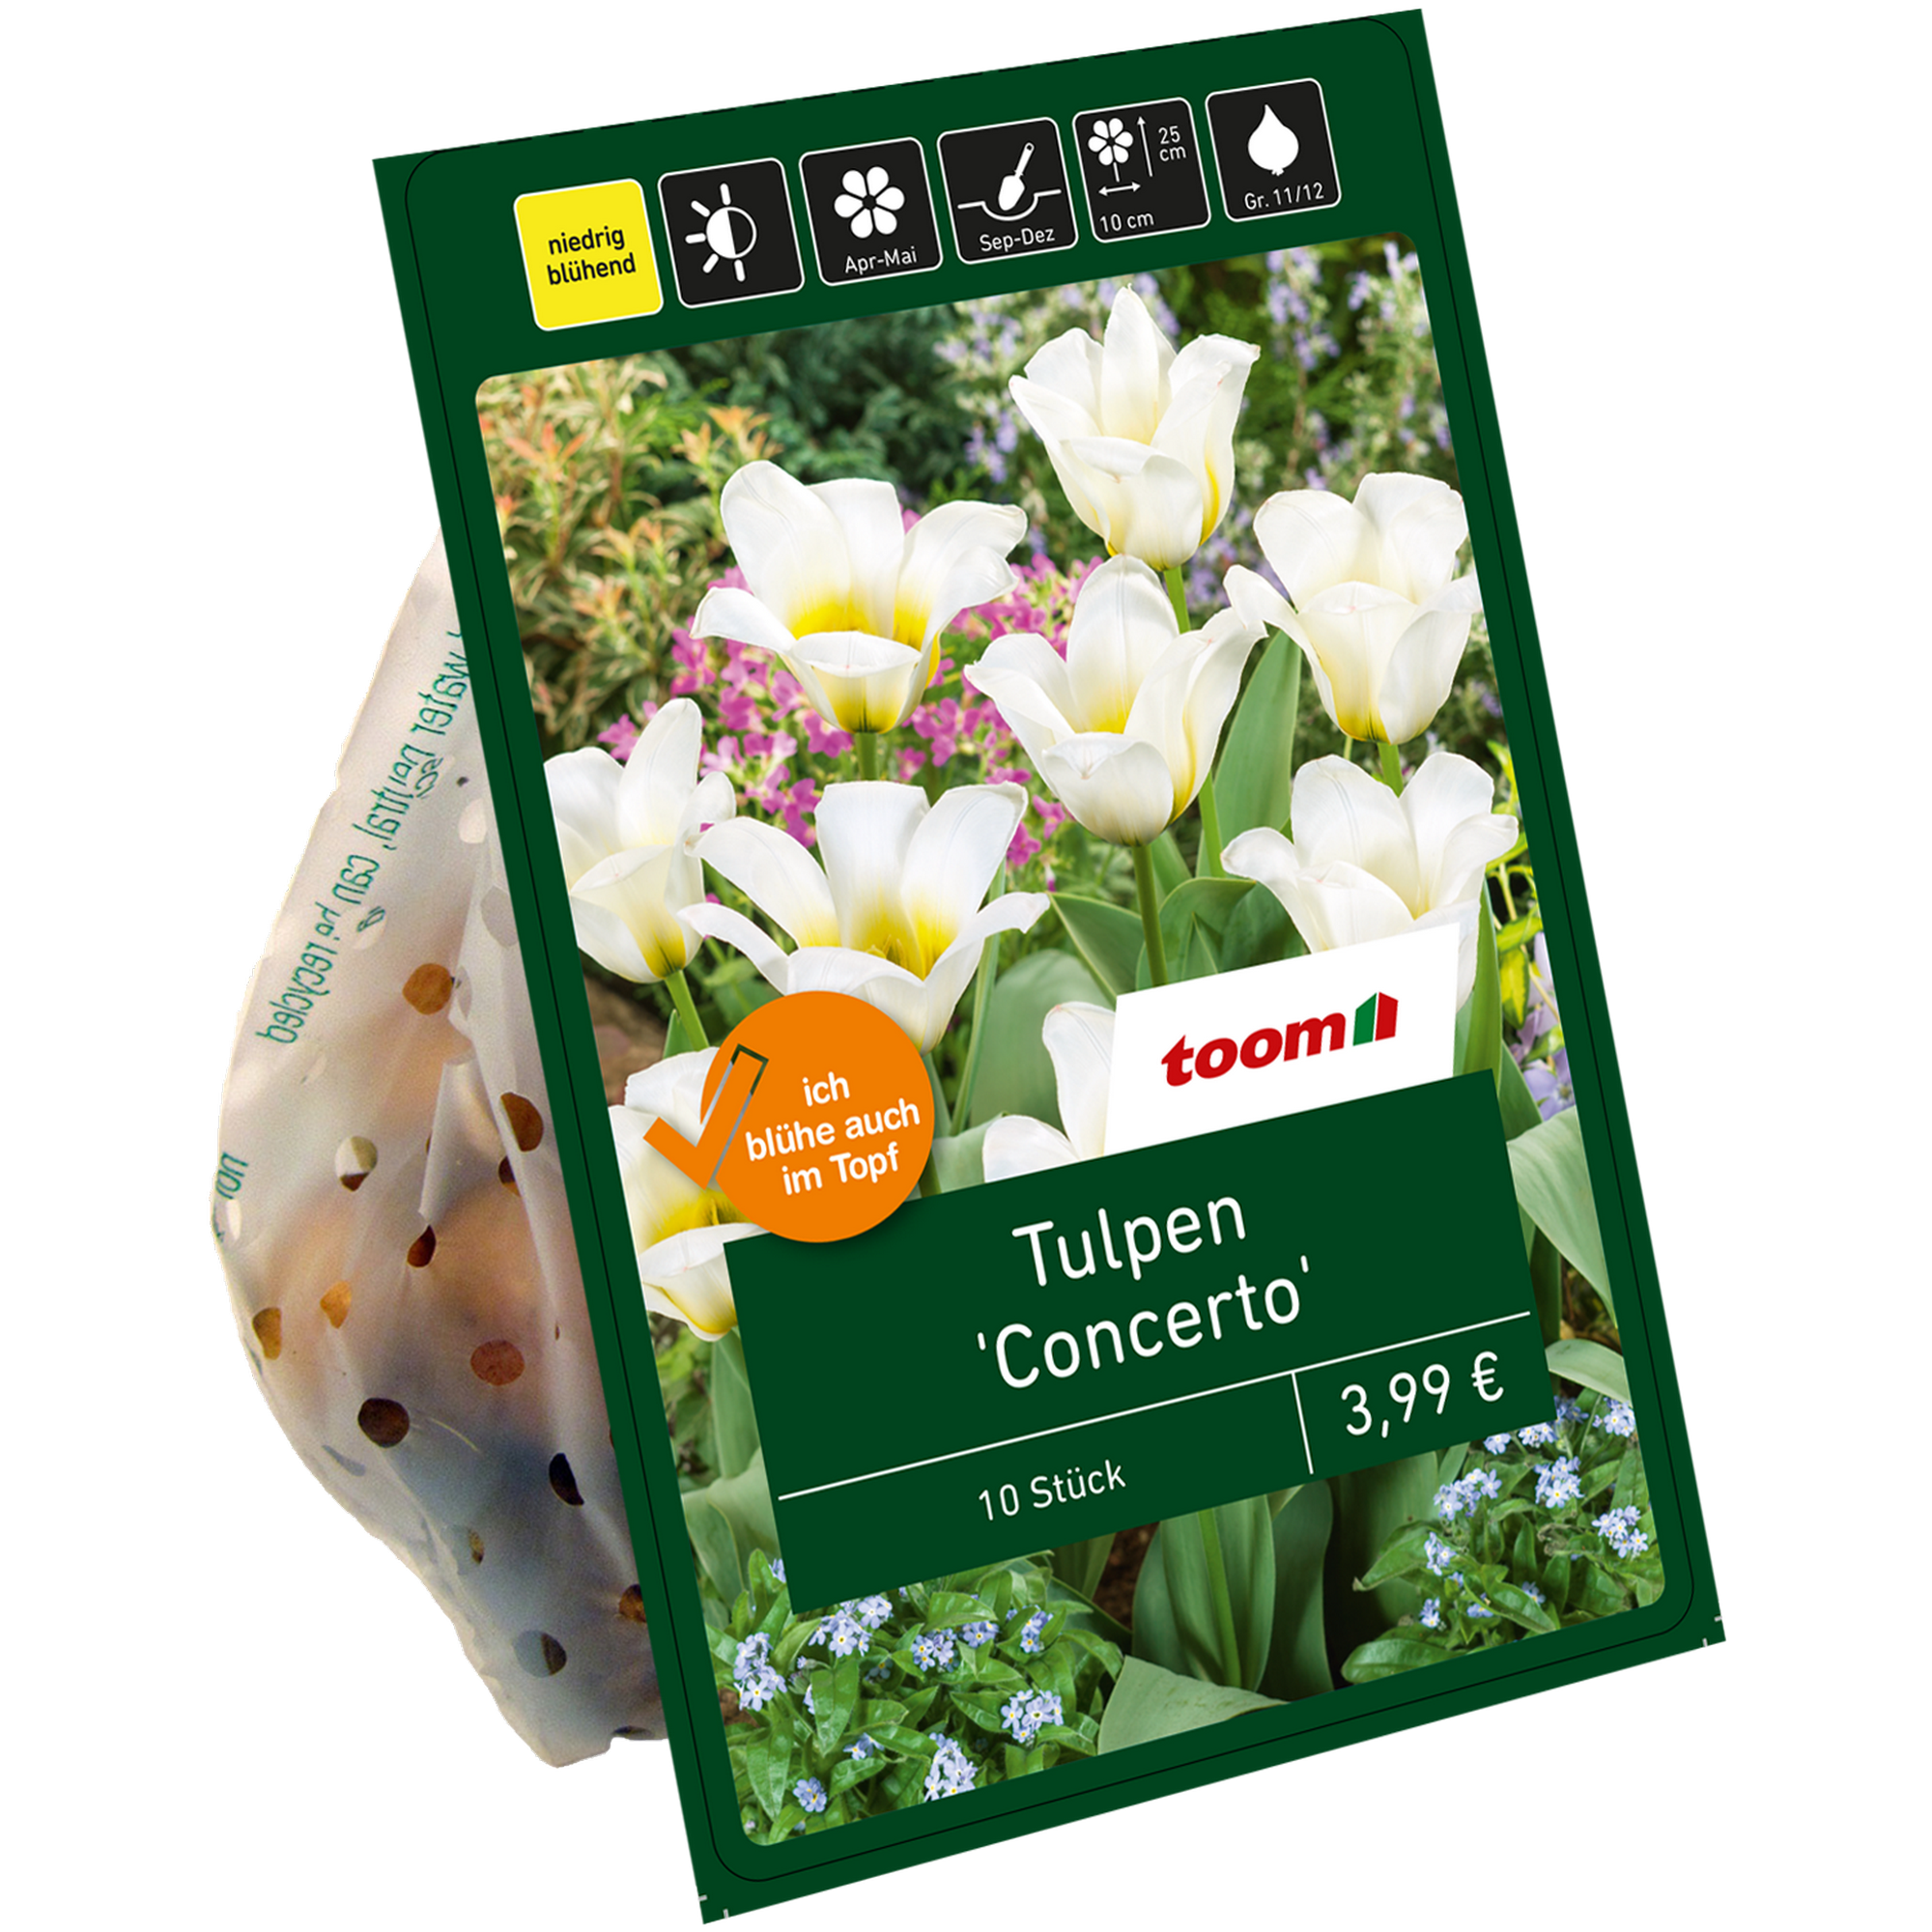 Tulpe 'Concerto' creme-gelb 10 Zwiebeln + product picture